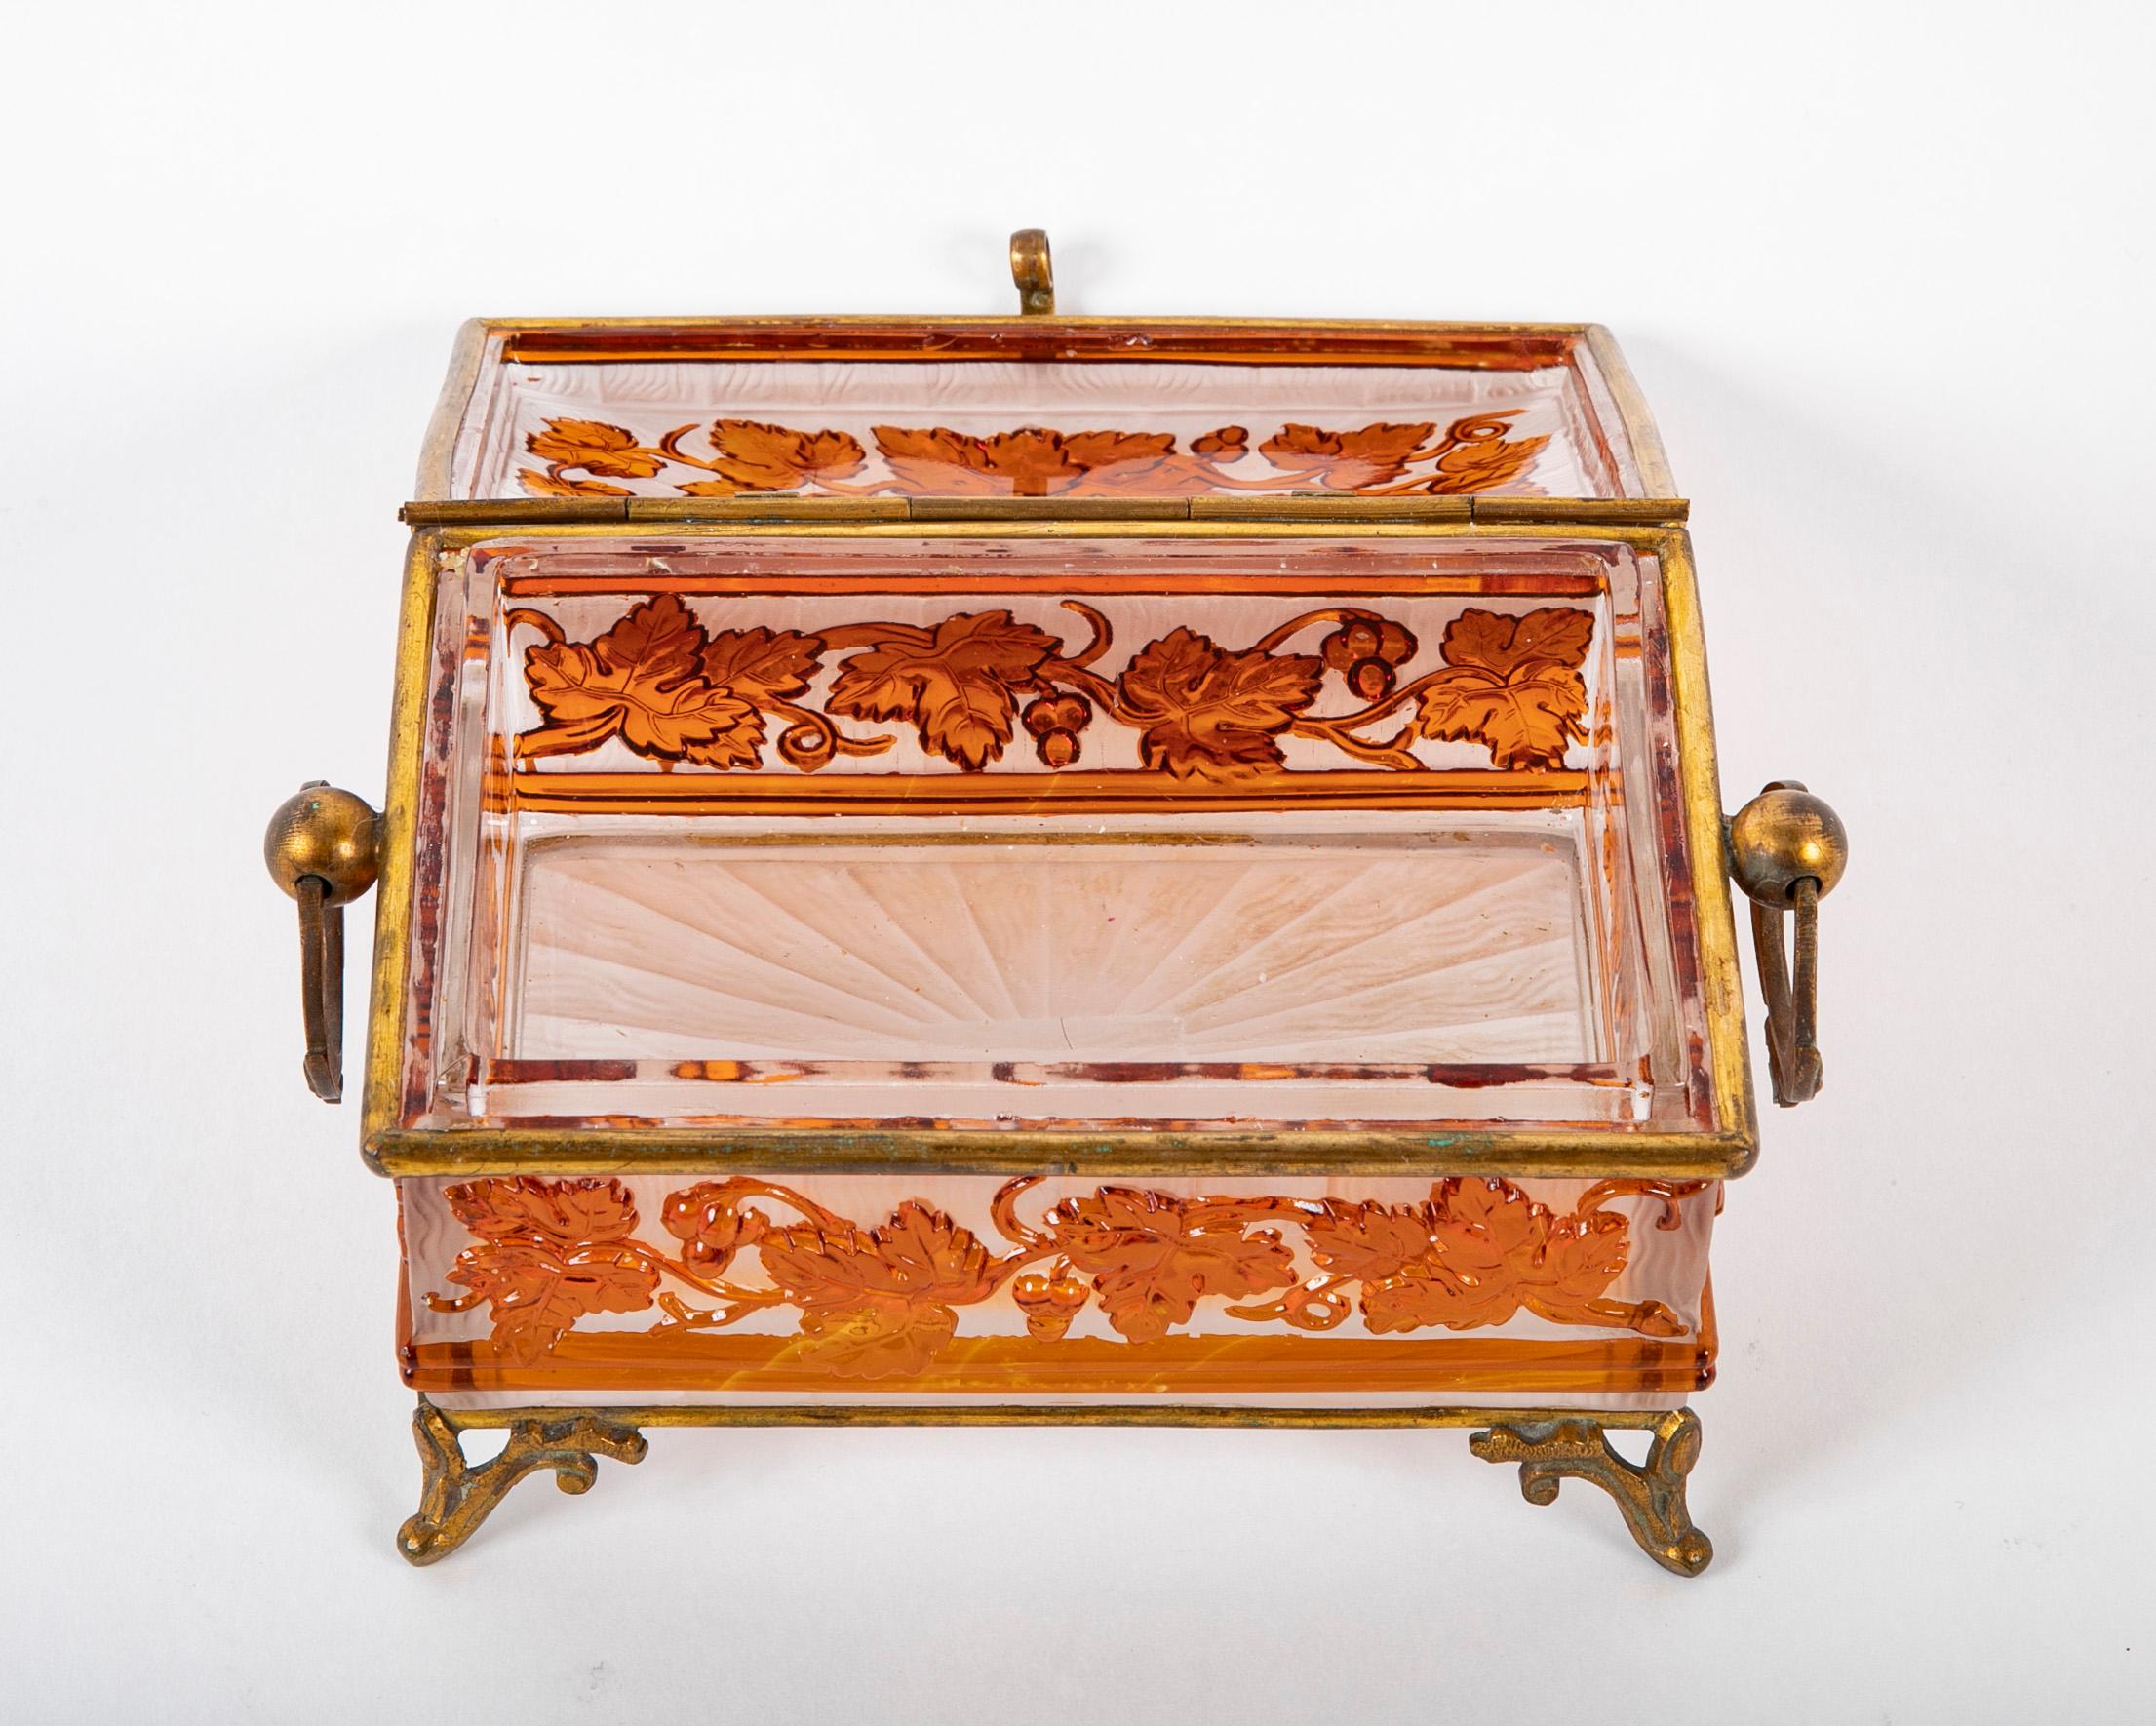 Antique Baccarat Acid Etched Cameo Glass Box with Leaf & Vine Motif In Good Condition For Sale In Stamford, CT